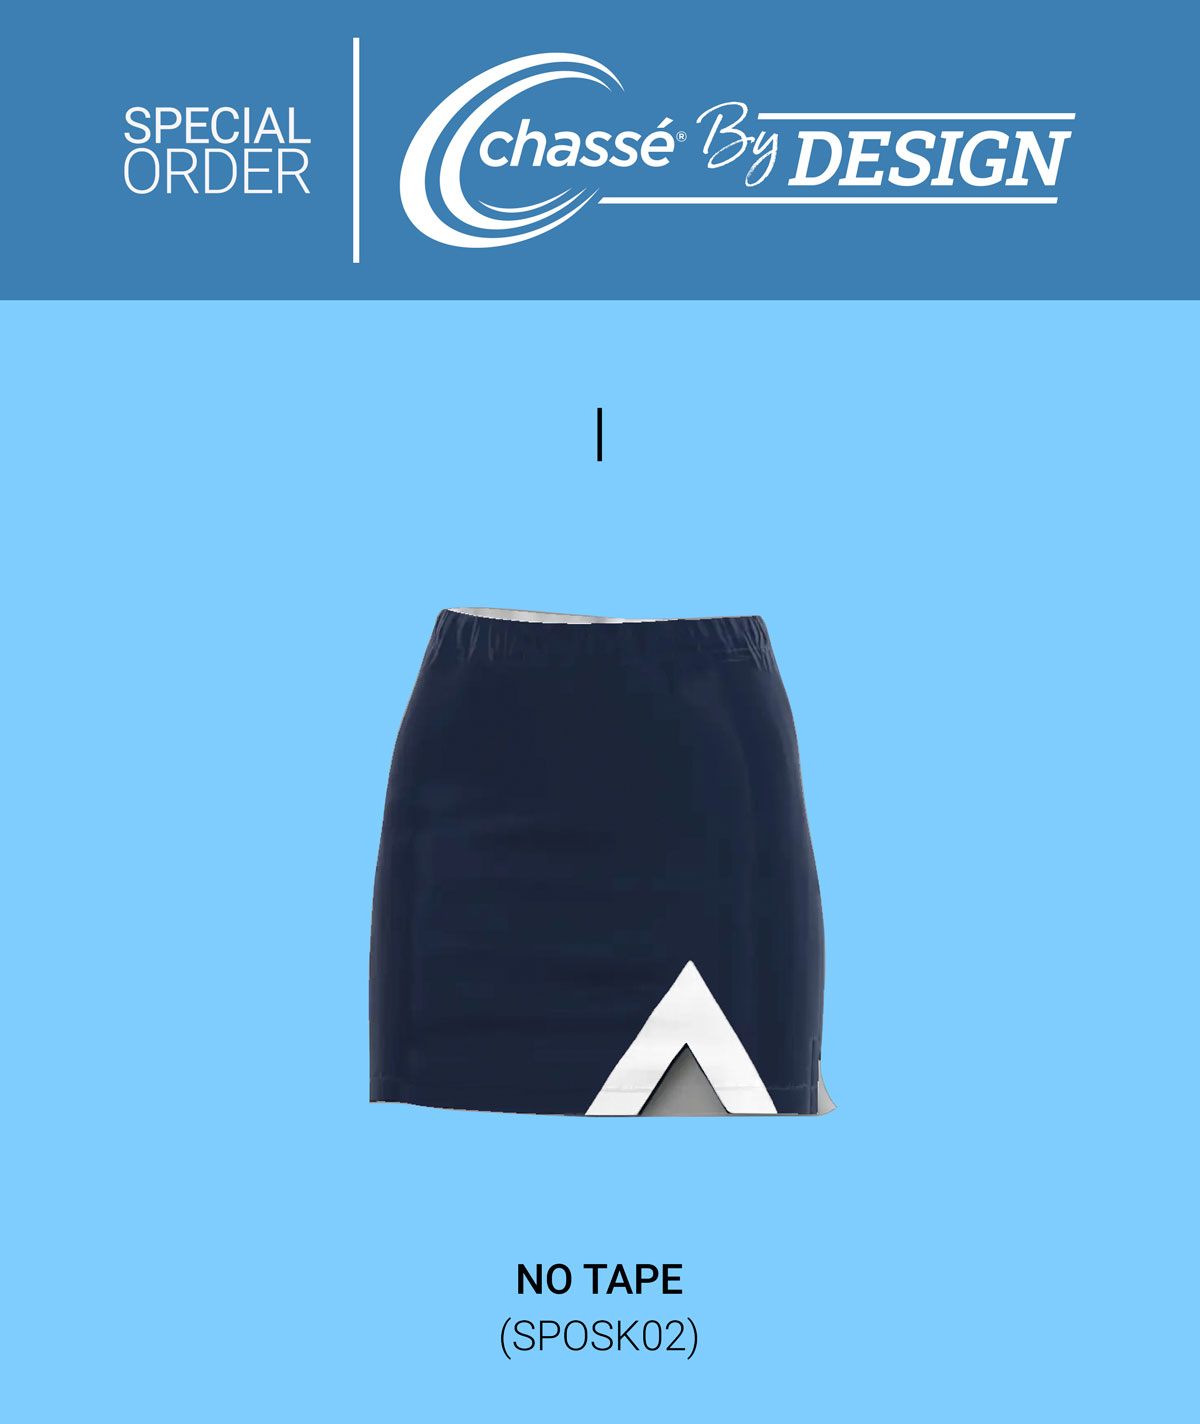 Chasse By Design Notch Skirt I